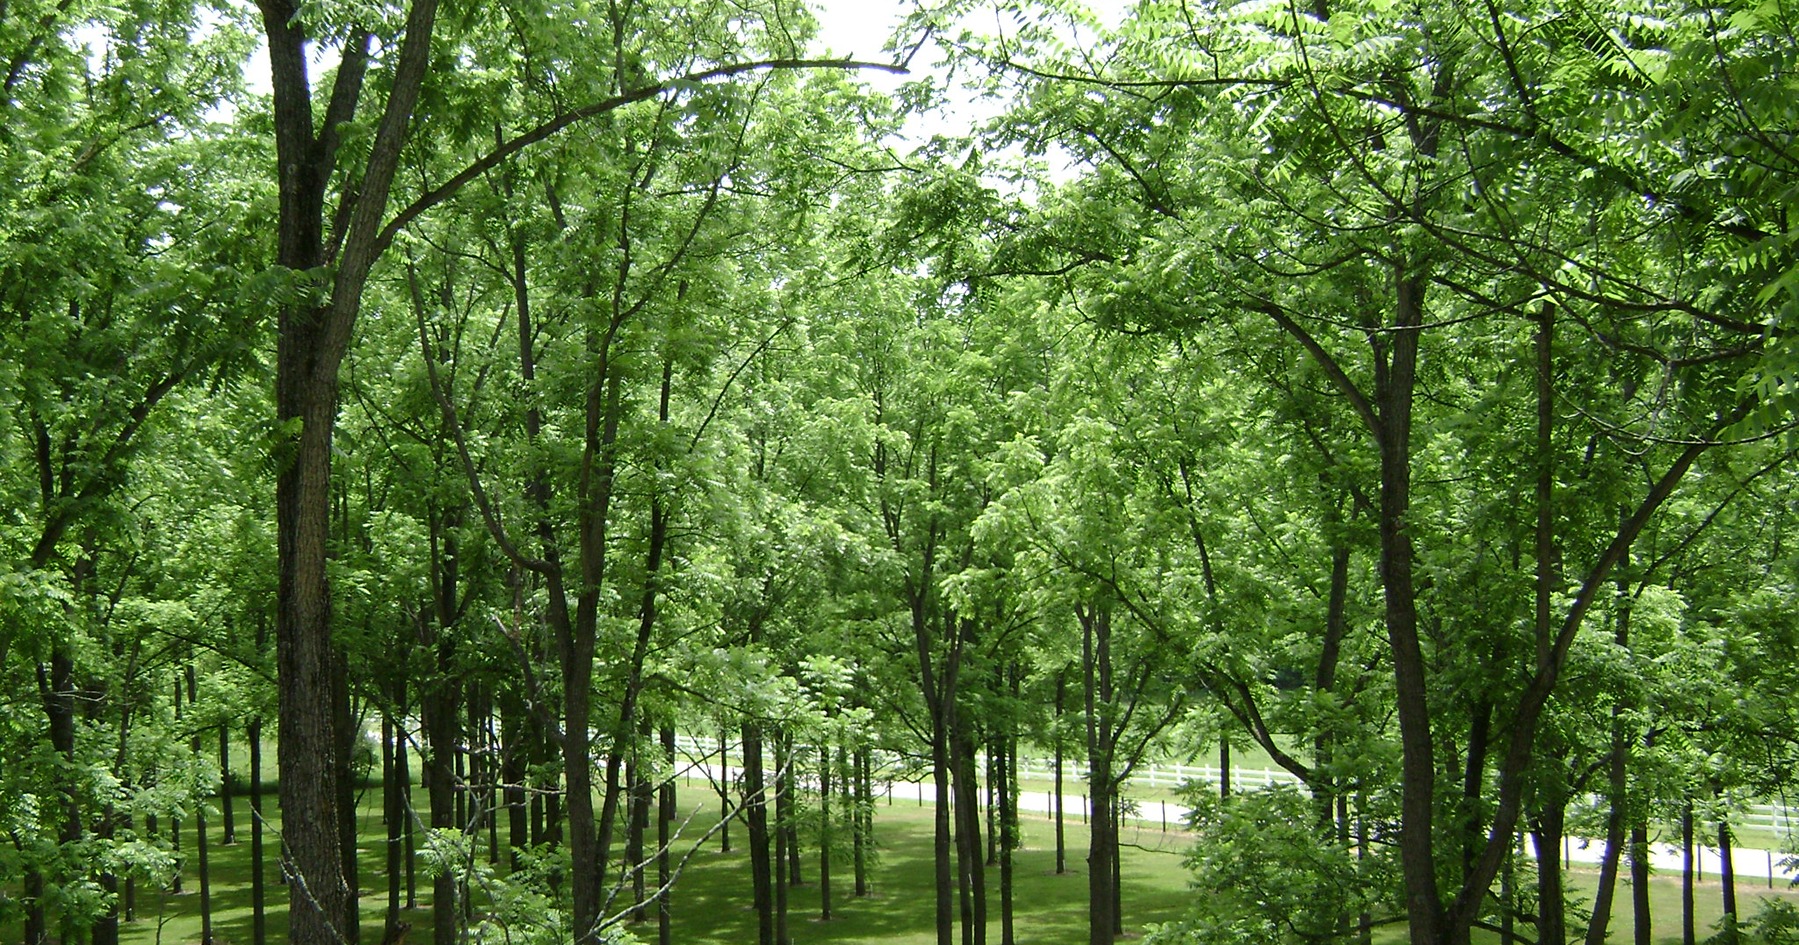 The walnut plantation at Martell Forest.